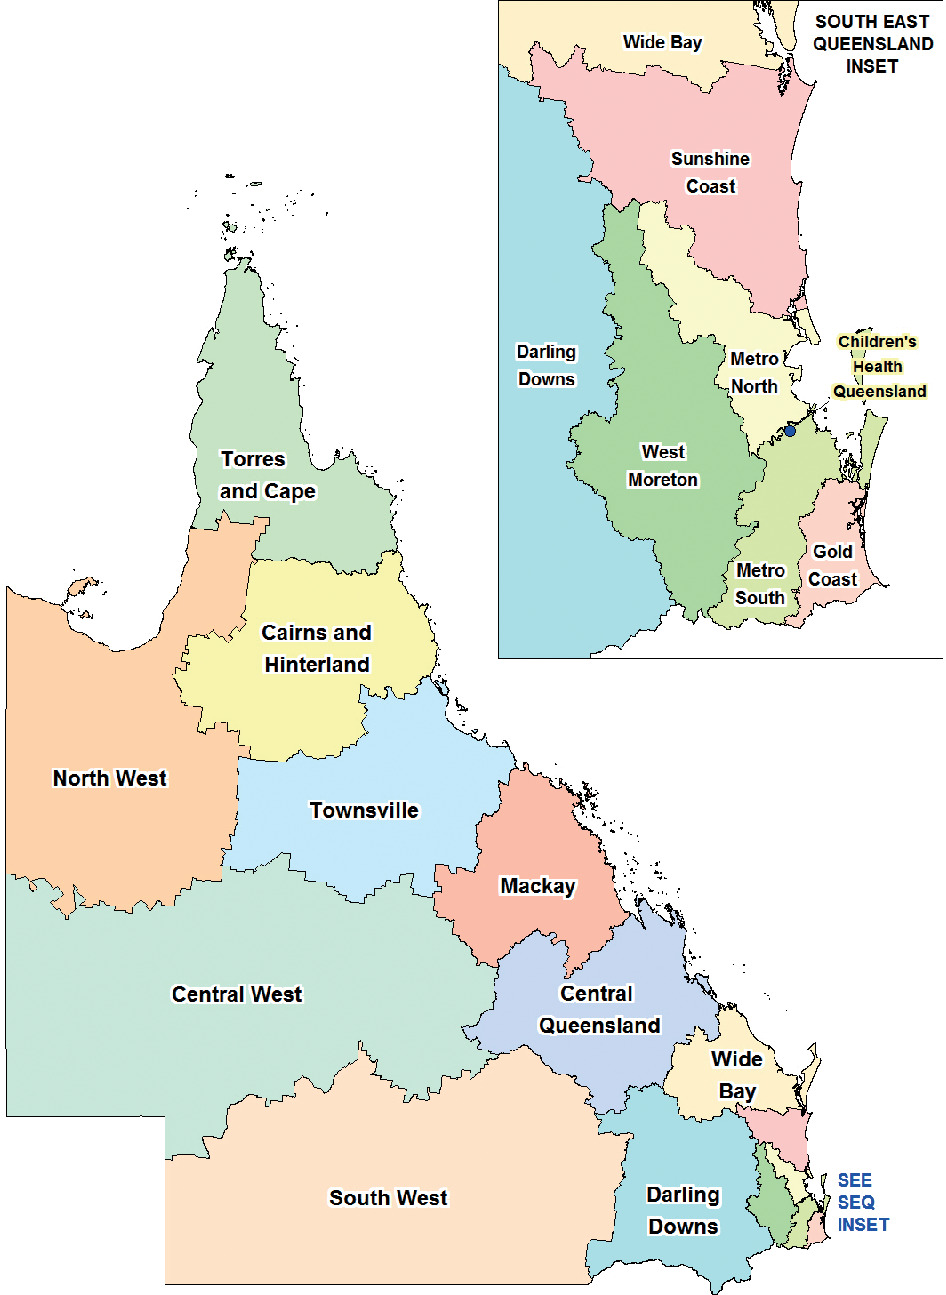 Fig. 1 
            Map of Queensland showing all 16 Hospital and Health Service (HHS) Districts governed by Queensland Health.14 Queensland is a state in Australia that has an area of 1.7 million km2 and a decentralized population of 5.24 million people.15 In the 2016 census, the median age was 37 years, sex split was 49.4% male and 50.6% female, and 4.0% were of Aboriginal or Torres Strait Islander background.16 The population is decentralized with 63% residing in a major city, 20% inner regional, 14% outer regional, 2% remote, and 1% very remote.17 Universal healthcare is available in the public system, with an additional private sector (encompassed by Queensland Health).
          